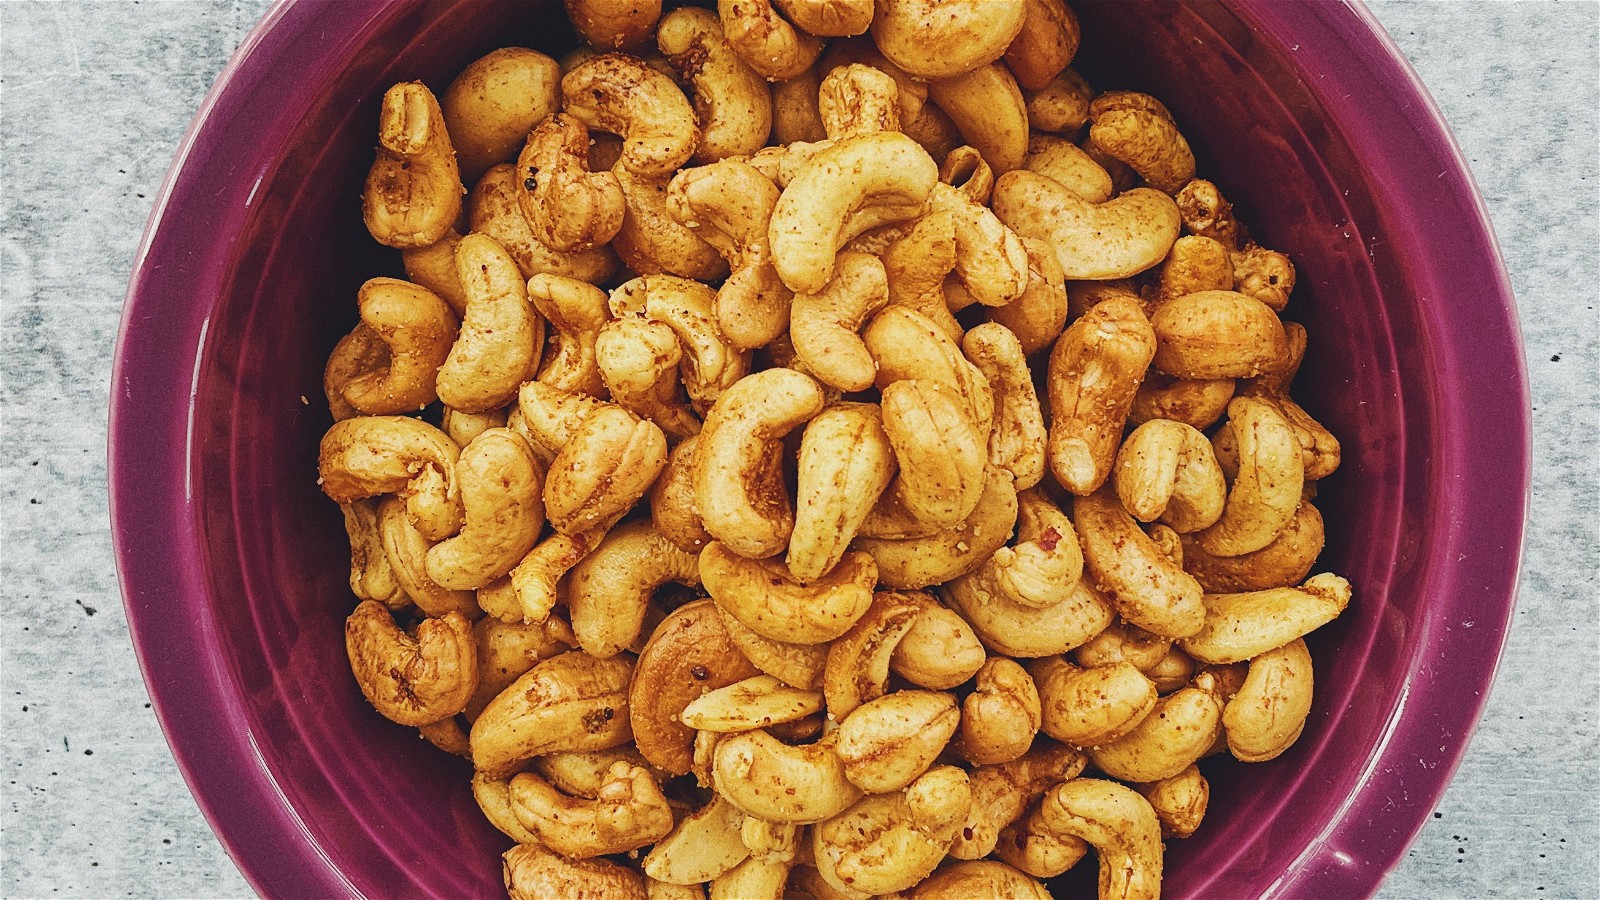 Image of Spiced Cashews